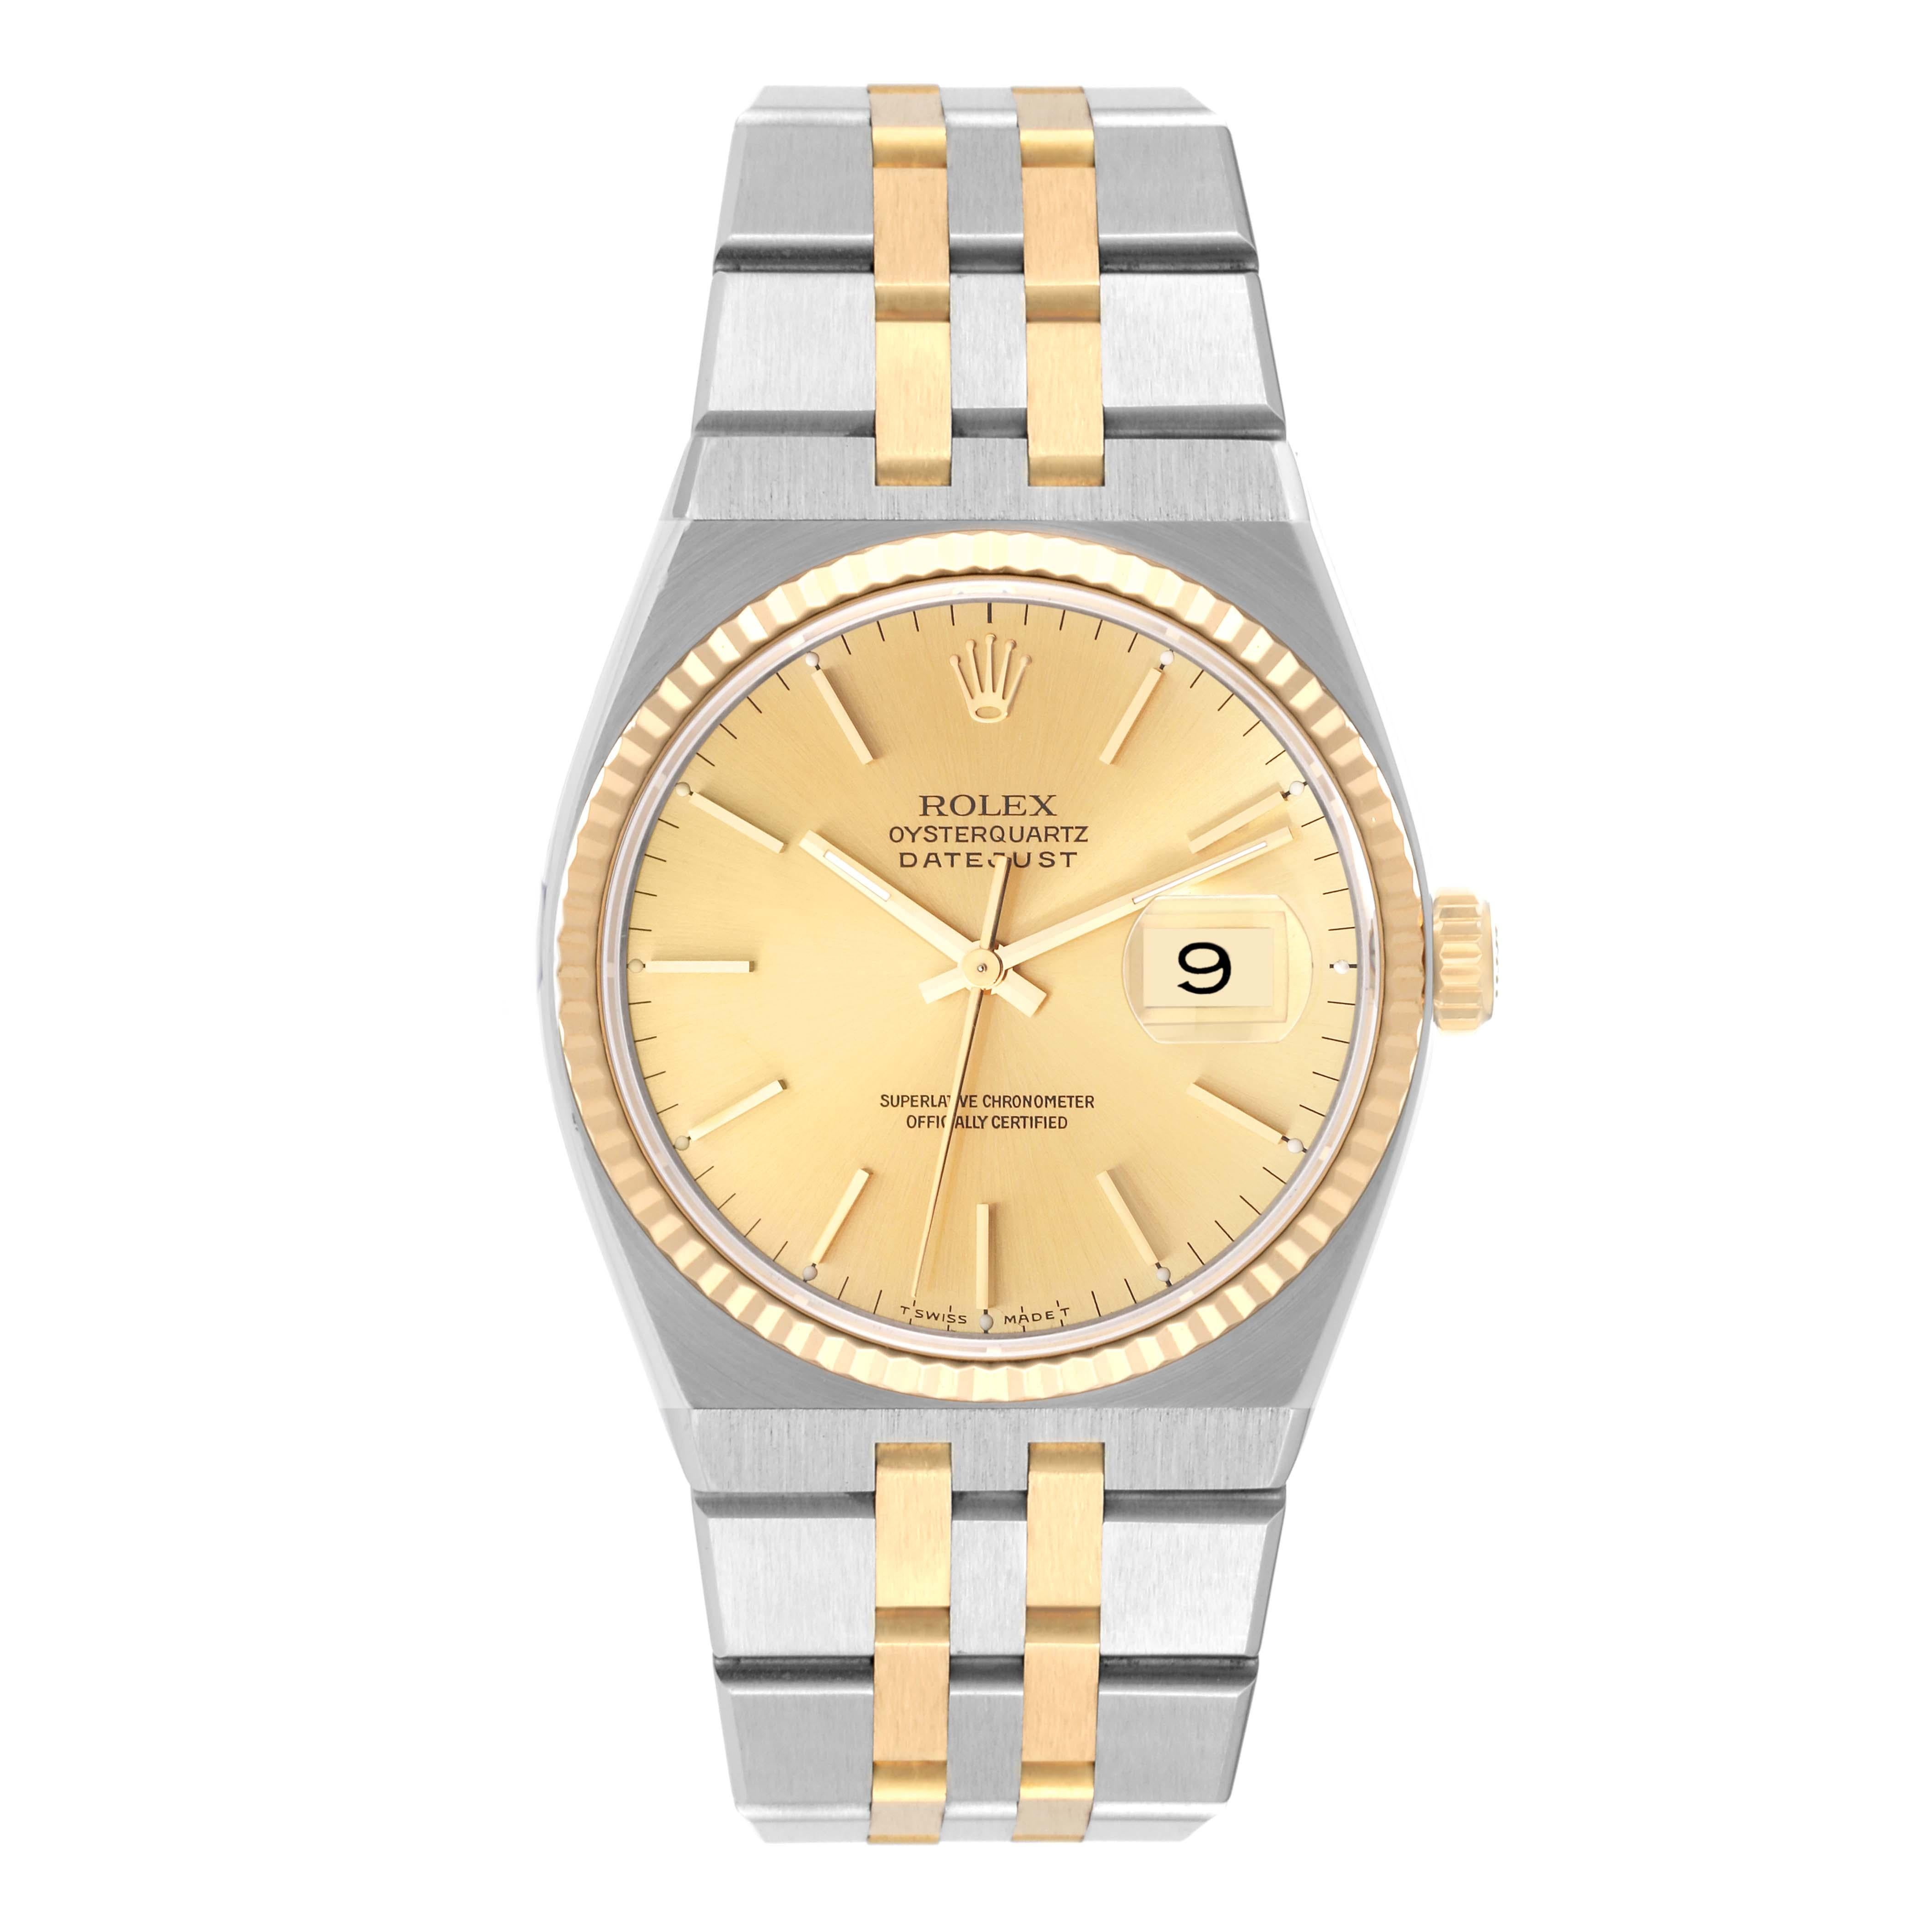 Rolex Oysterquartz Datejust Steel Yellow Gold Mens Watch 17013. Quartz movement. Stainless steel oyster case 36 mm in diameter. Rolex logo on the crown. 18k yellow gold fluted bezel. Scratch resistant sapphire crystal with cyclops magnifier.